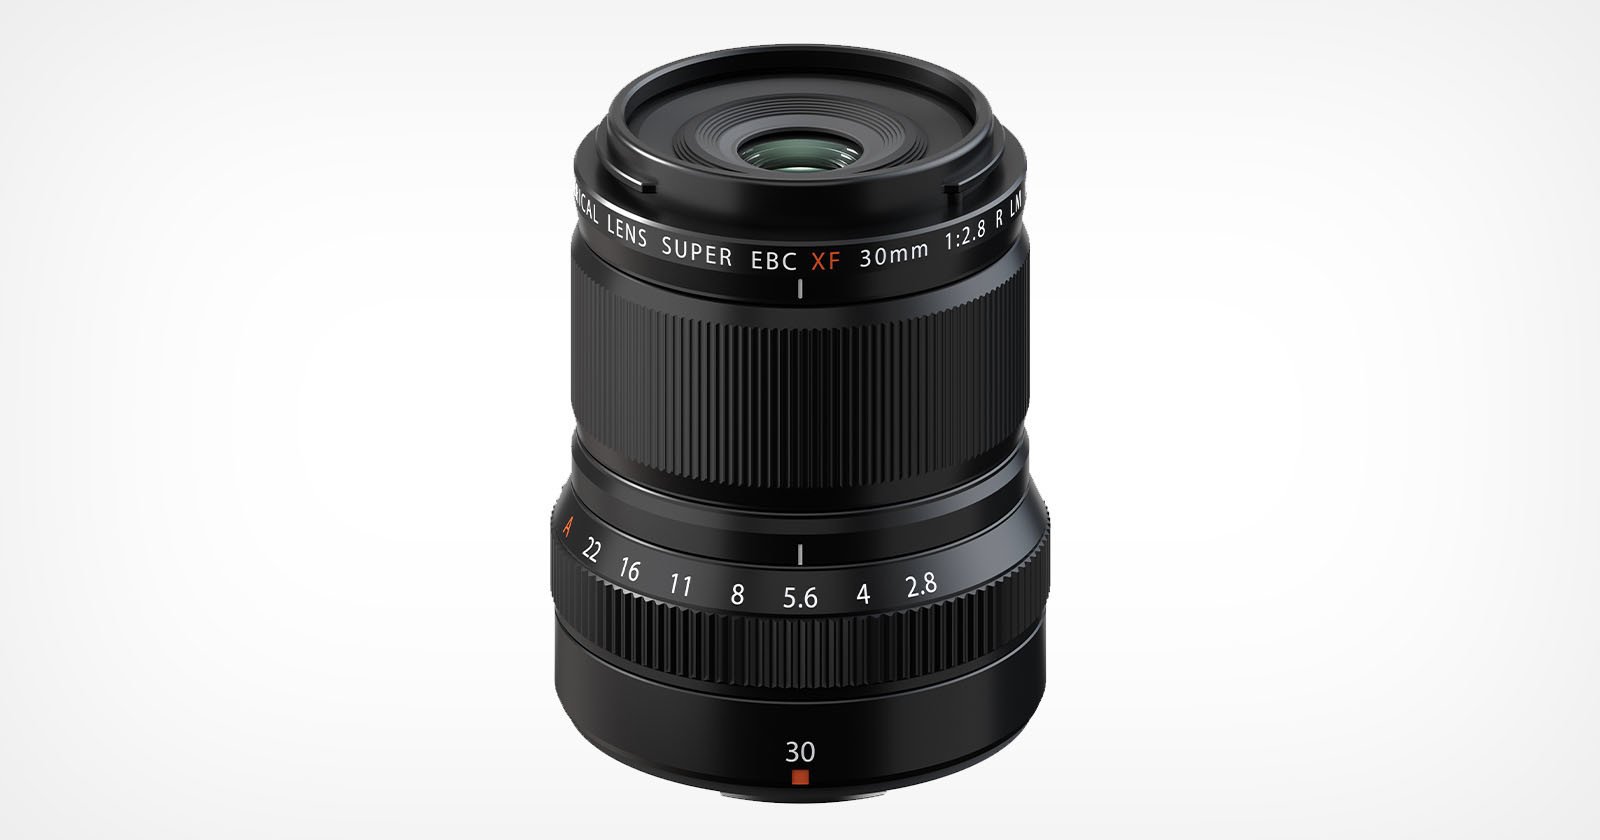 Fujifilms New 30mm f/2.8 Macro Lens Can Get Up Close and Personal